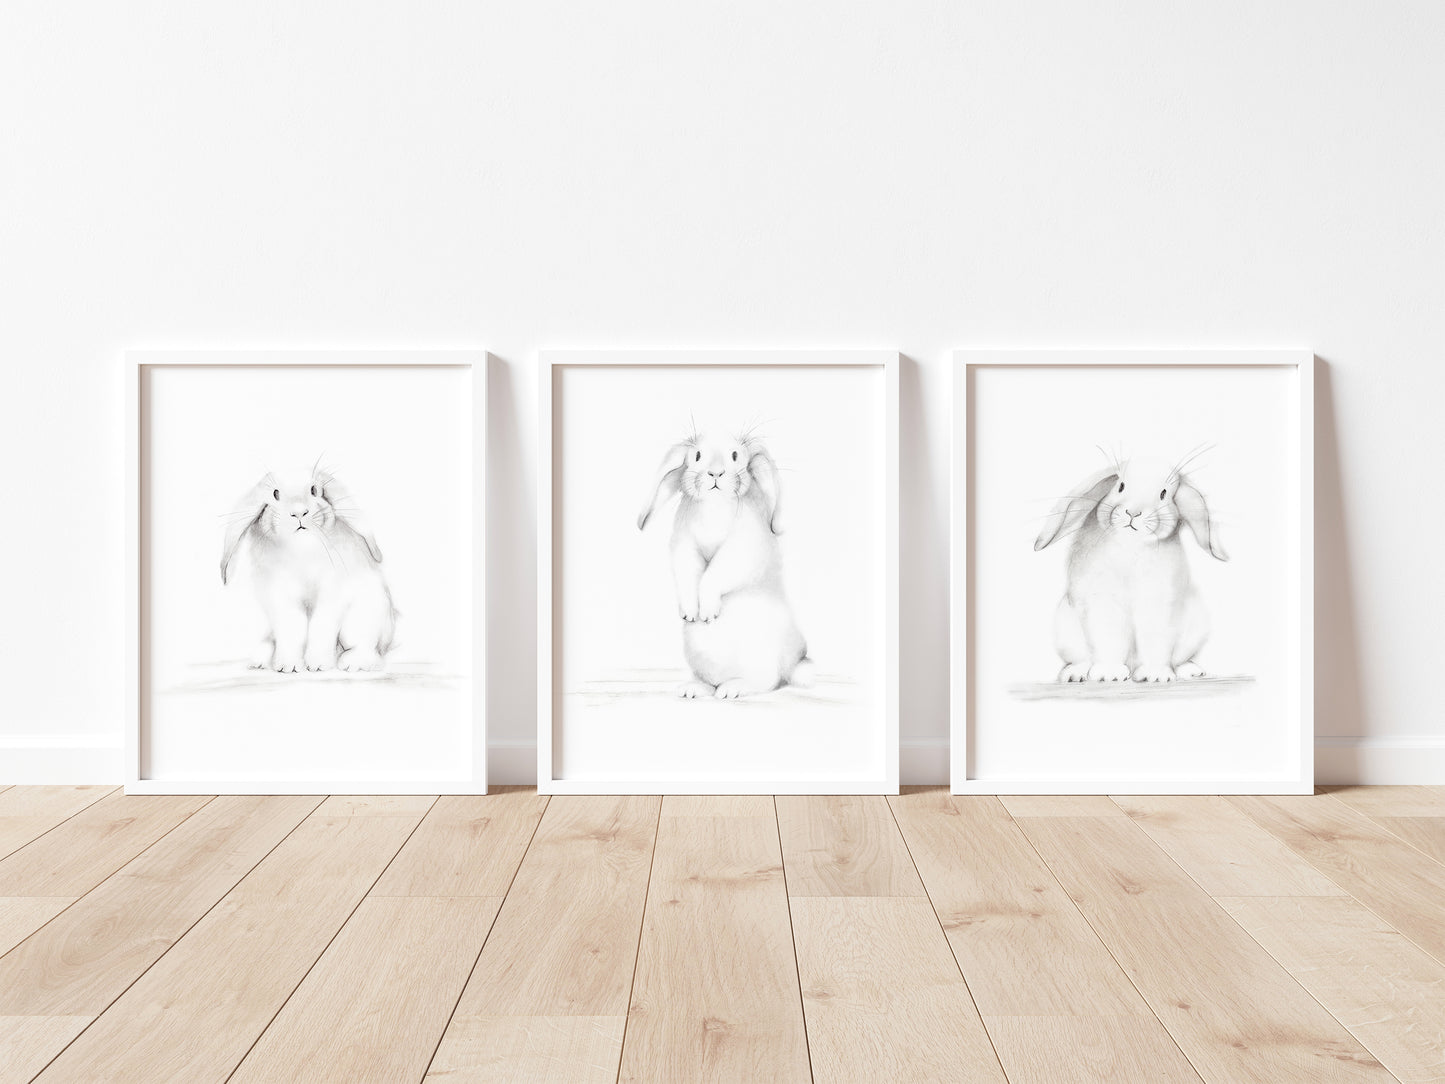 Set of 3 white bunny sketches in grey on a plain white background. Prints are mounted in white frames and sit on a wood floor - Studio Q - Art by Nicky Quartermaine Scott